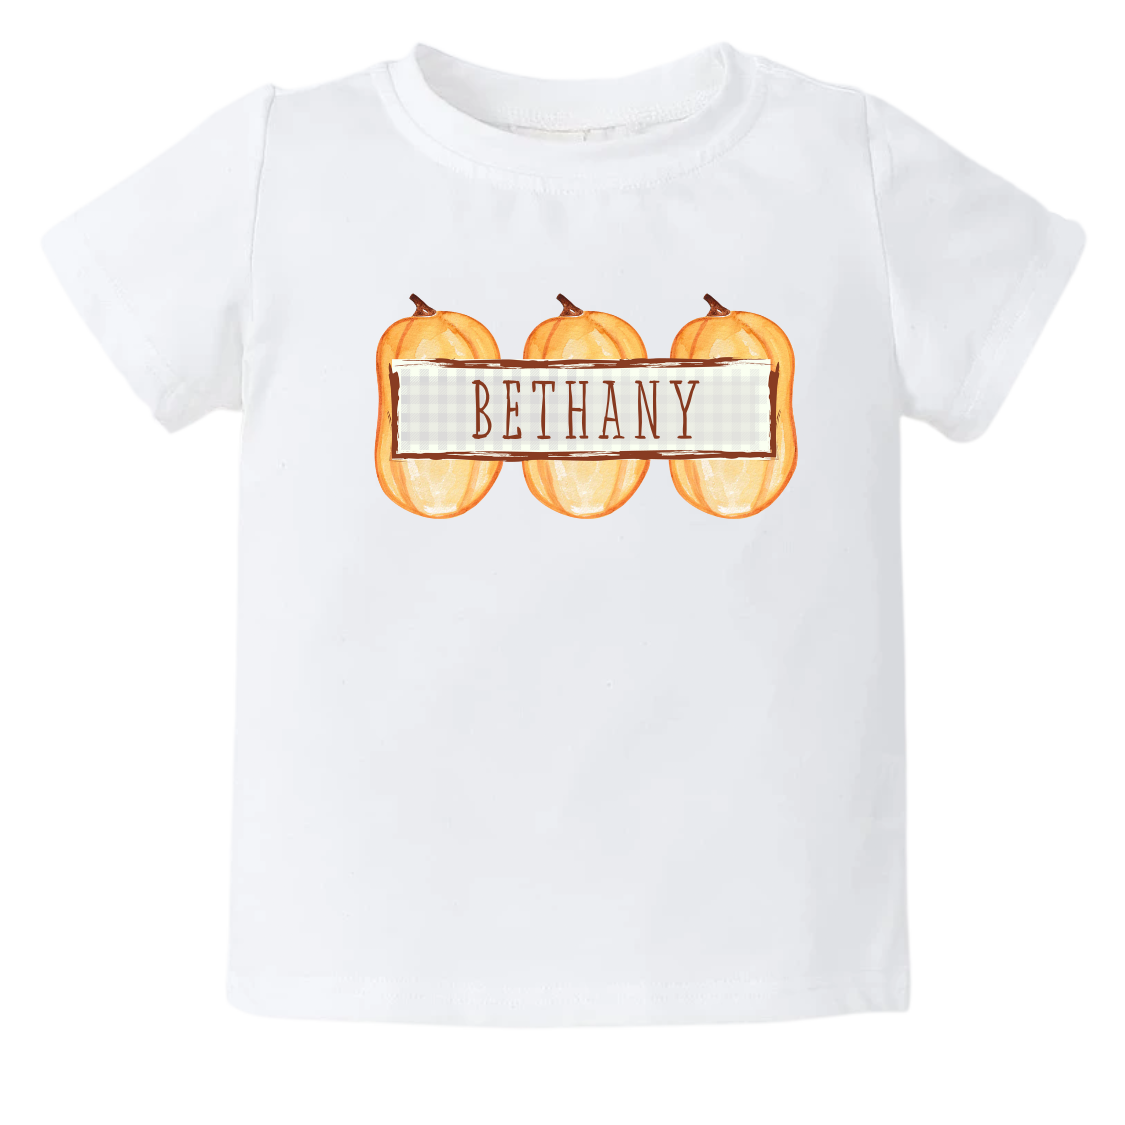 Kid's t-shirt with a cute pumpkin frame design, customizable with names.